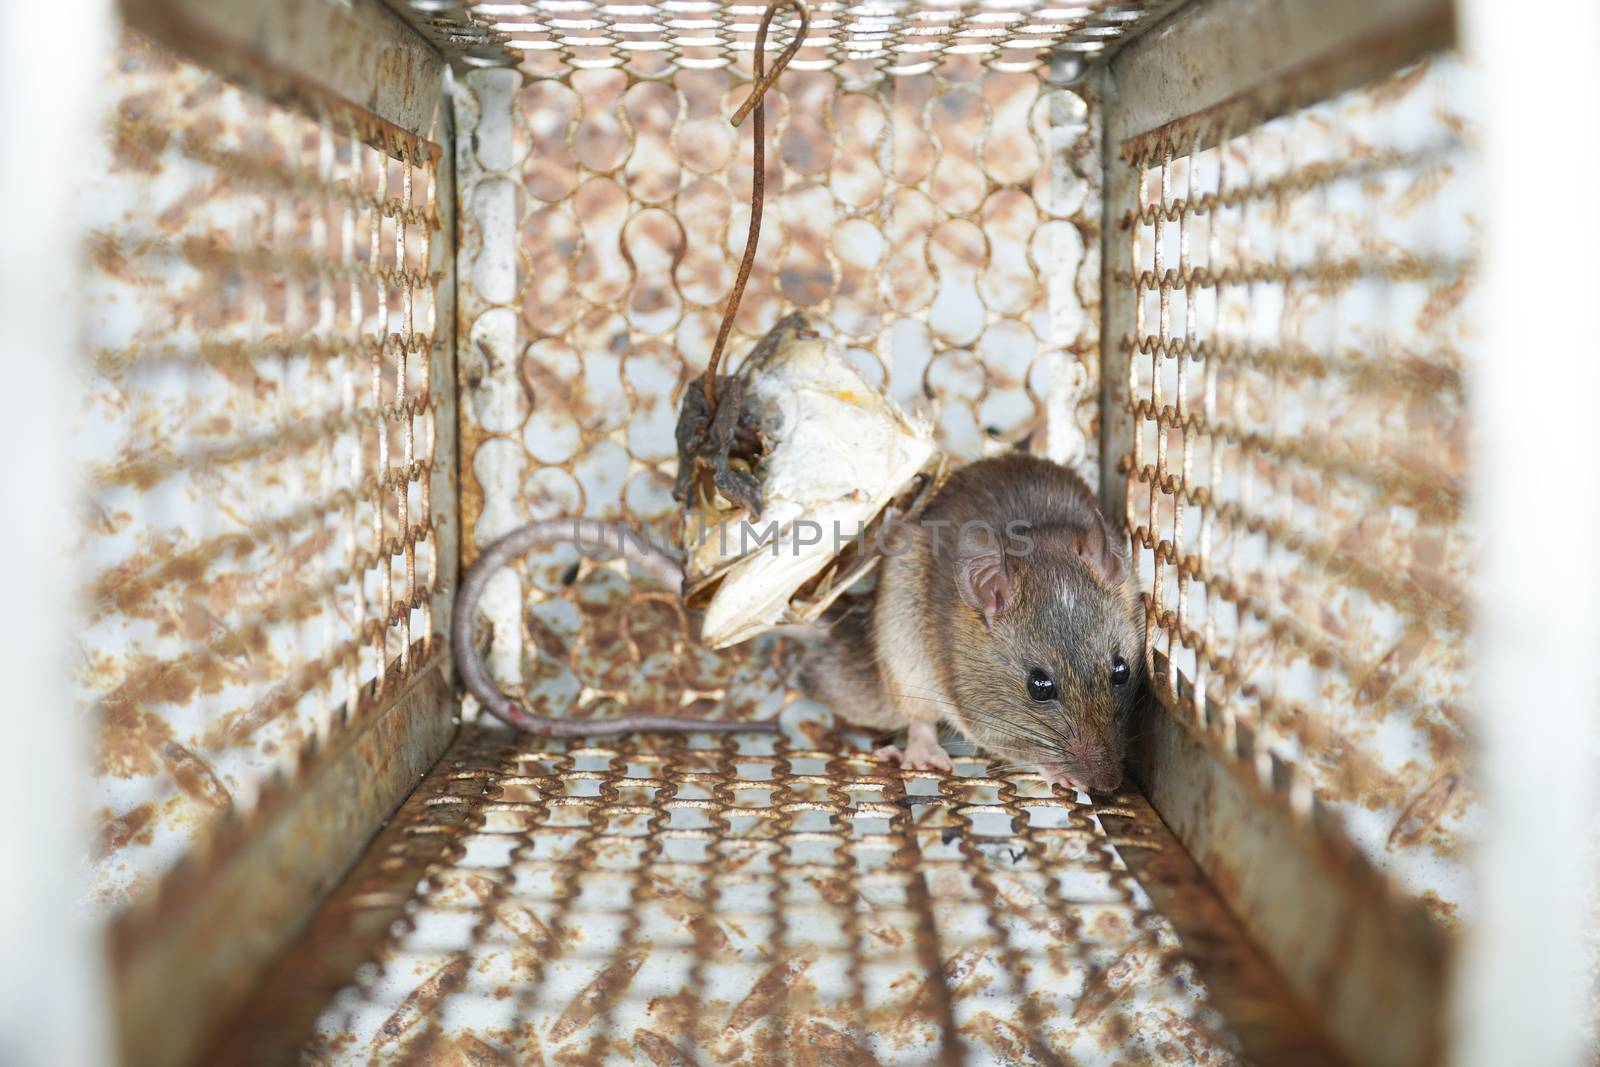 Close-up of a rat trapped in a mousetrap cage, Rodent control cage in house.